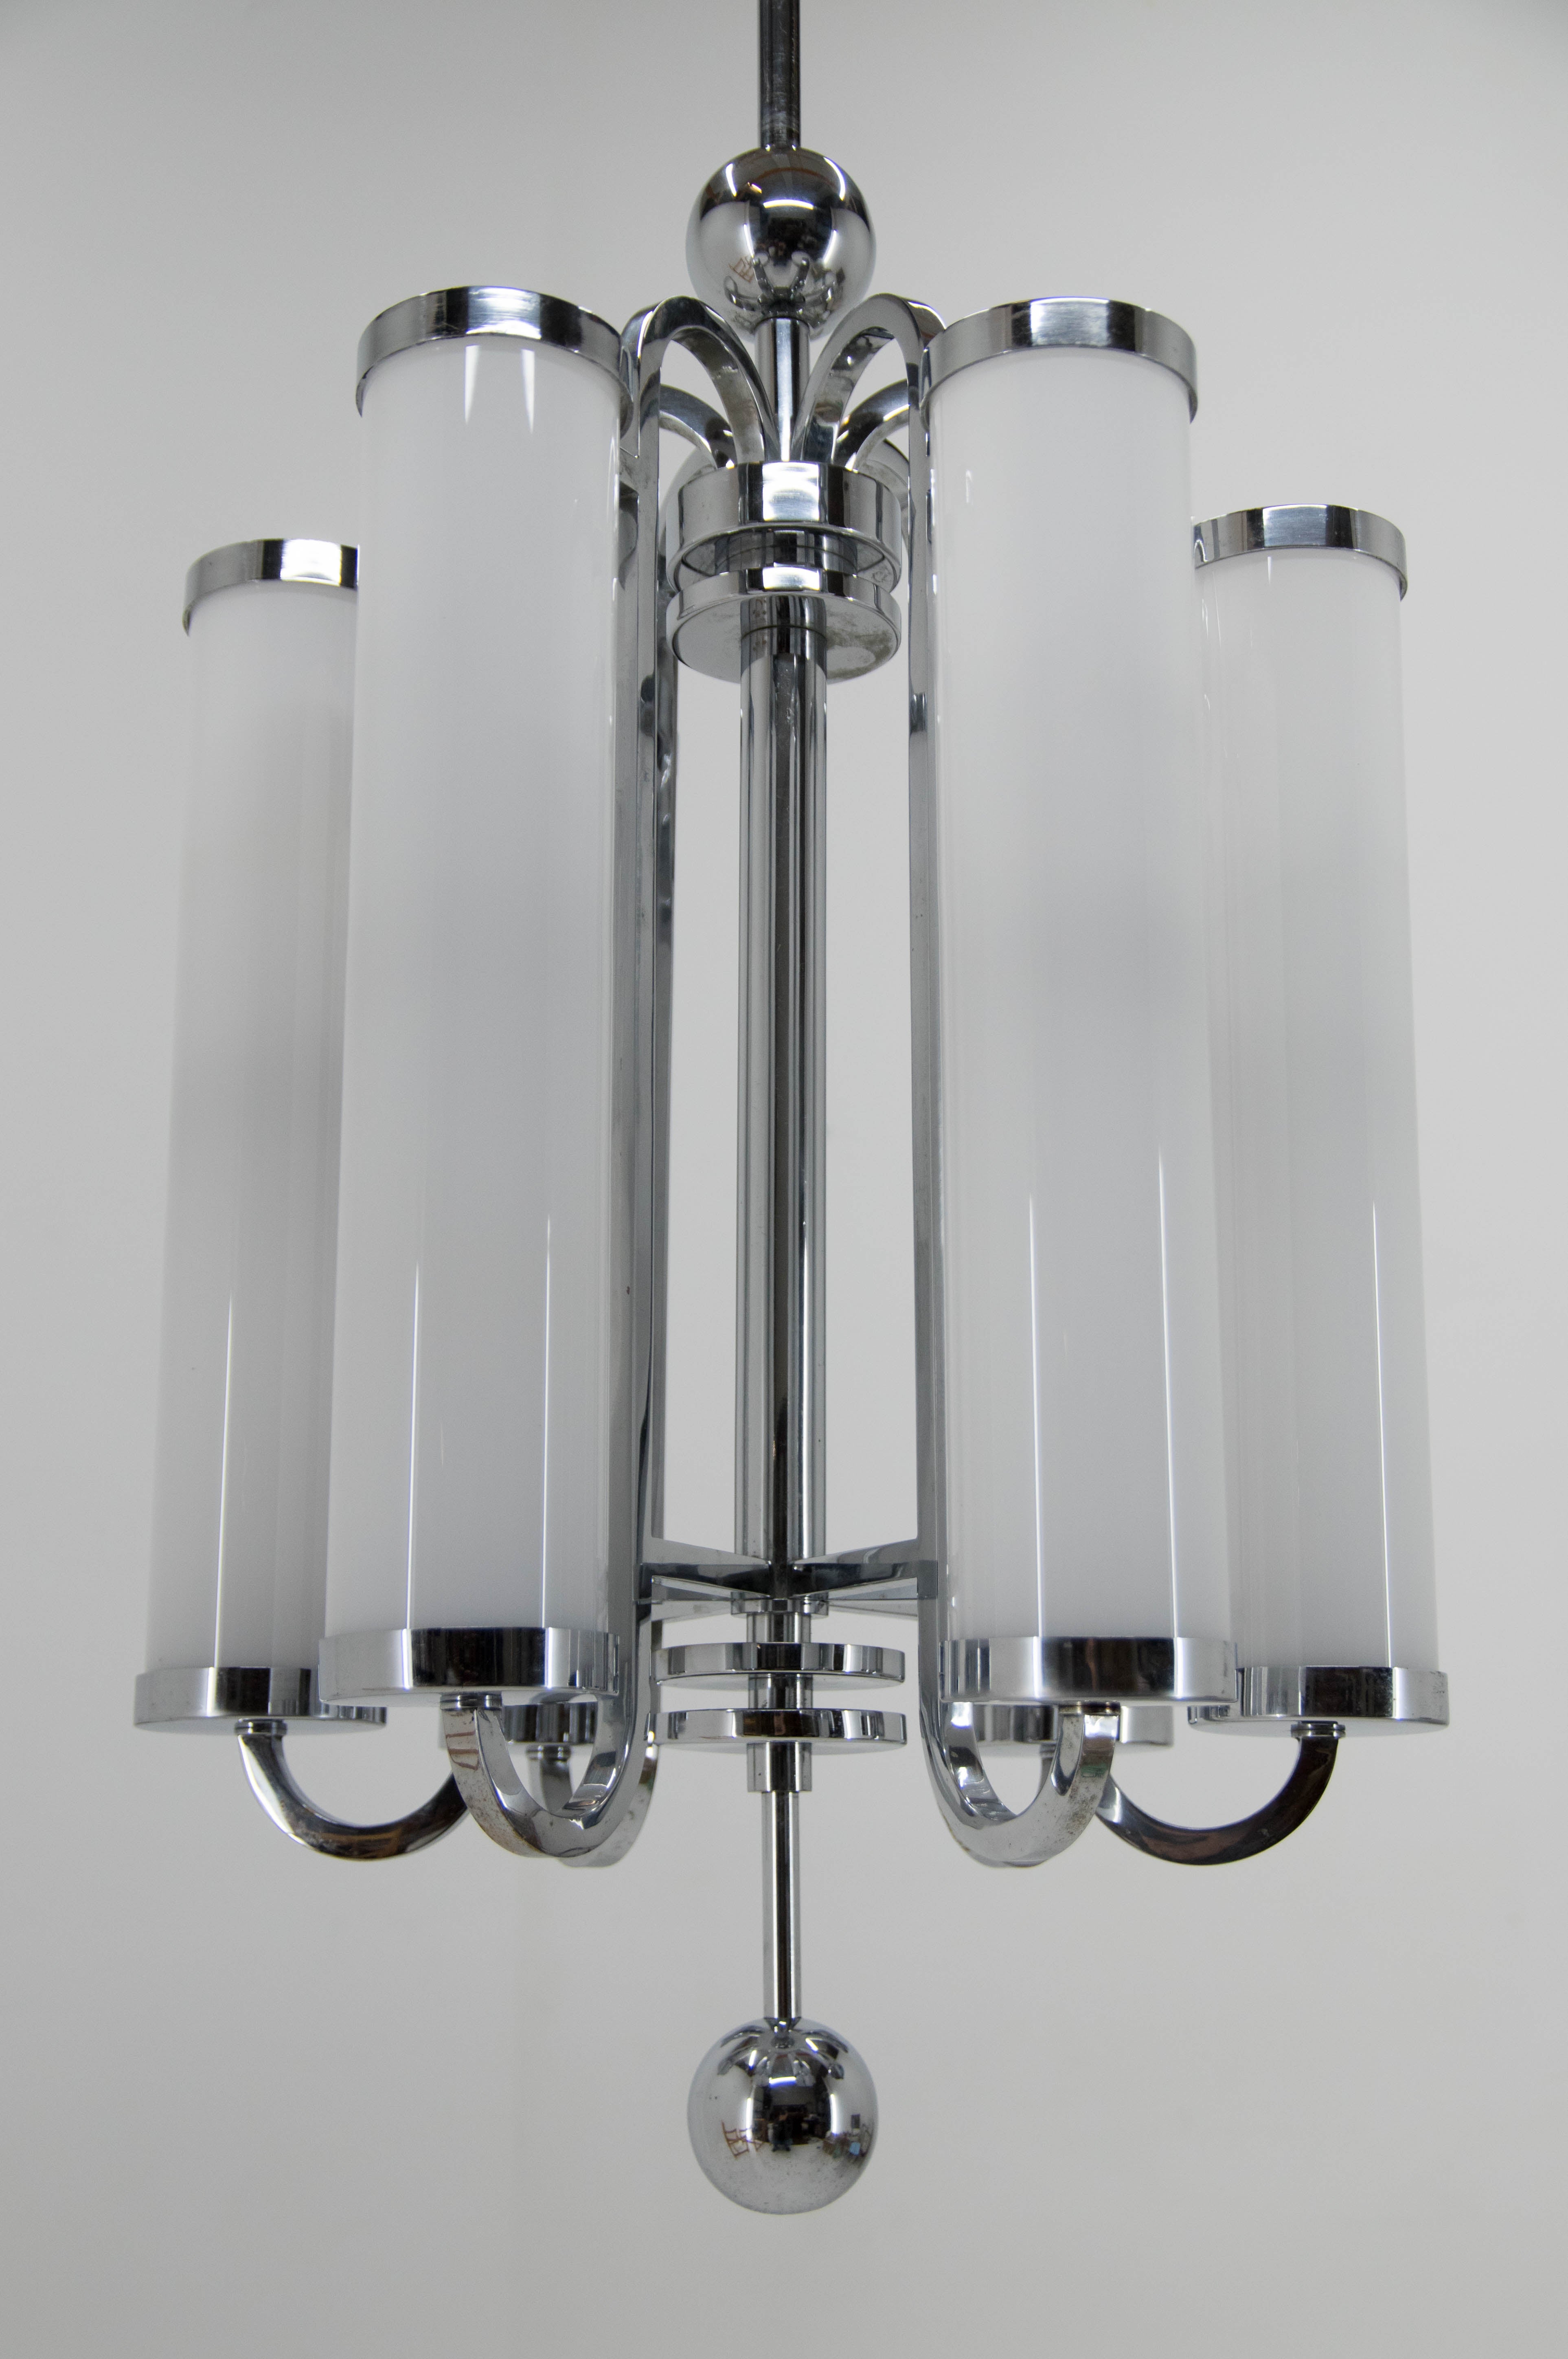 Unique beautiful huge Bauhaus chandelier with two separate circuits - 6+6 40W, E25-E27 bulbs.
Chrome-plating with age patina in a good condition - polished
New hand made blown triplex opaline glass shades in excellent condition, measures: height